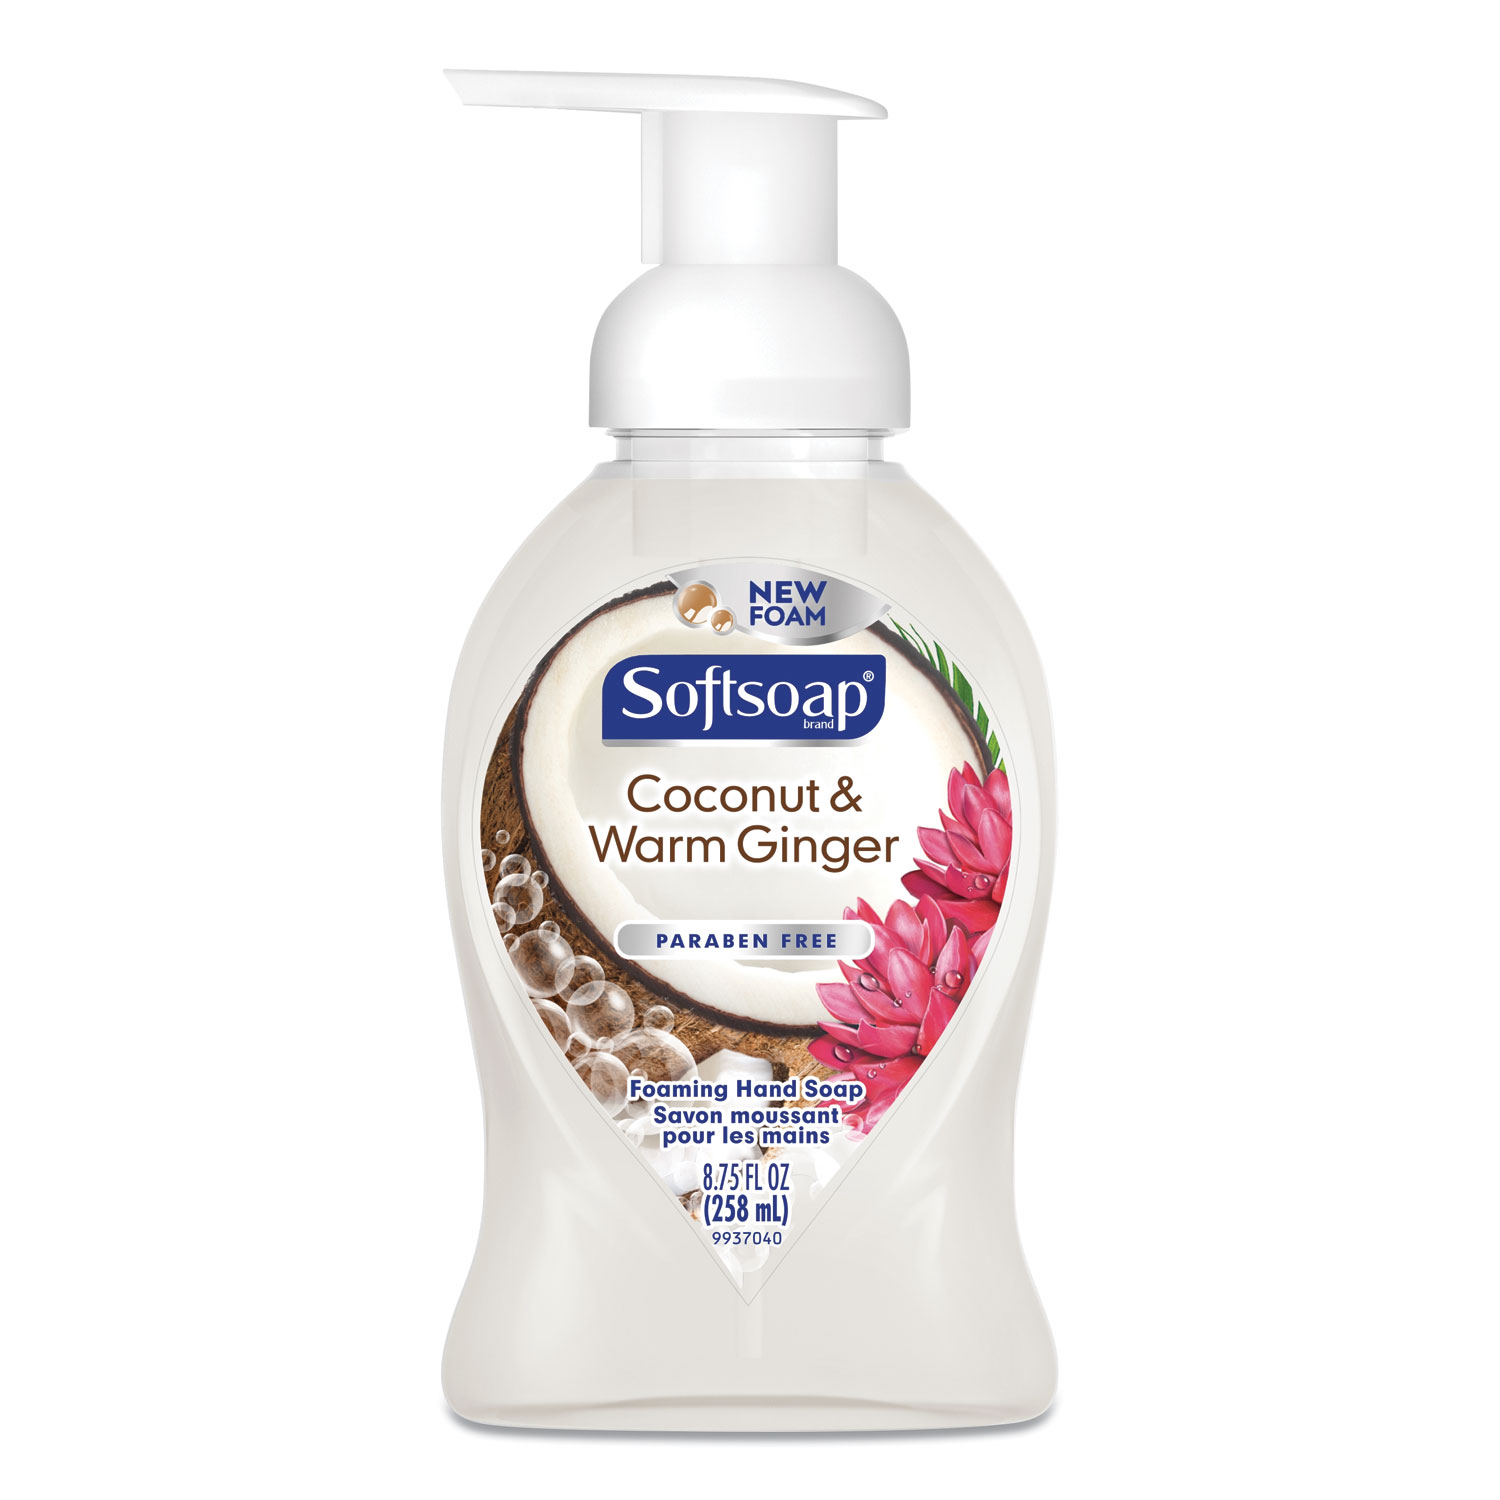 Softsoap® Sensorial Foaming Hand Soap, 8.75 oz Pump Bottle, Coconut and Warm Ginger